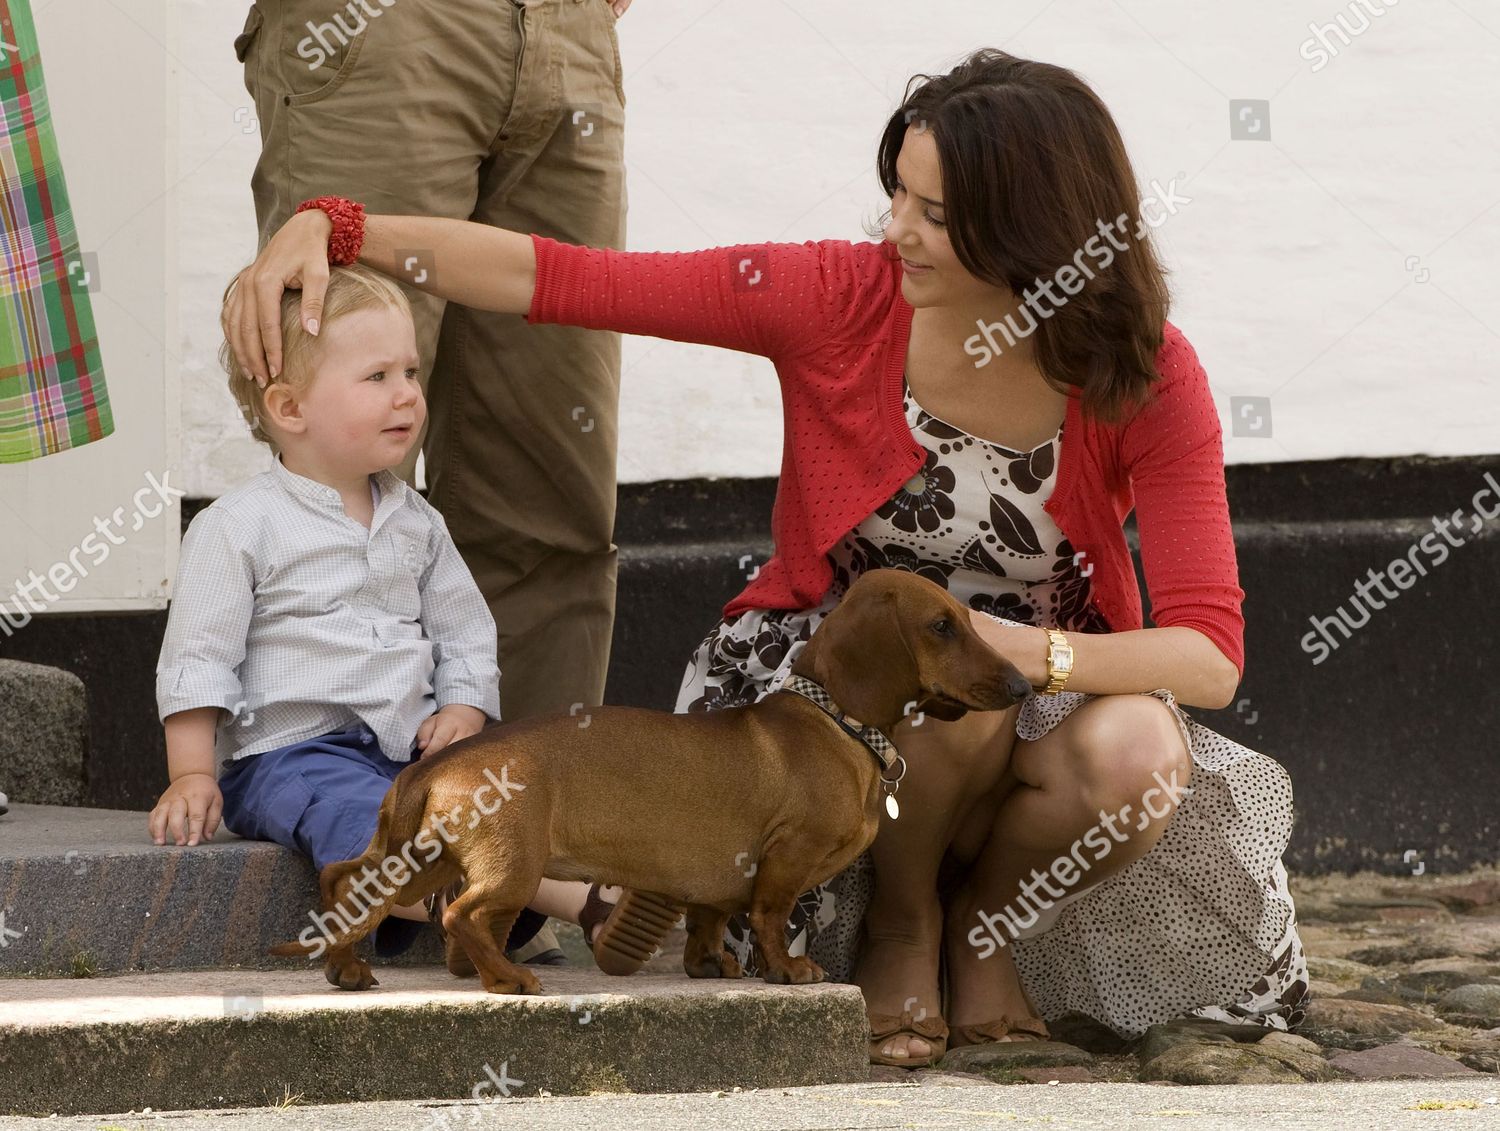 danish-royal-family-photocall-and-changing-of-the-guard-at-grasten-palace-denmark-shutterstock-editorial-680143t.jpg